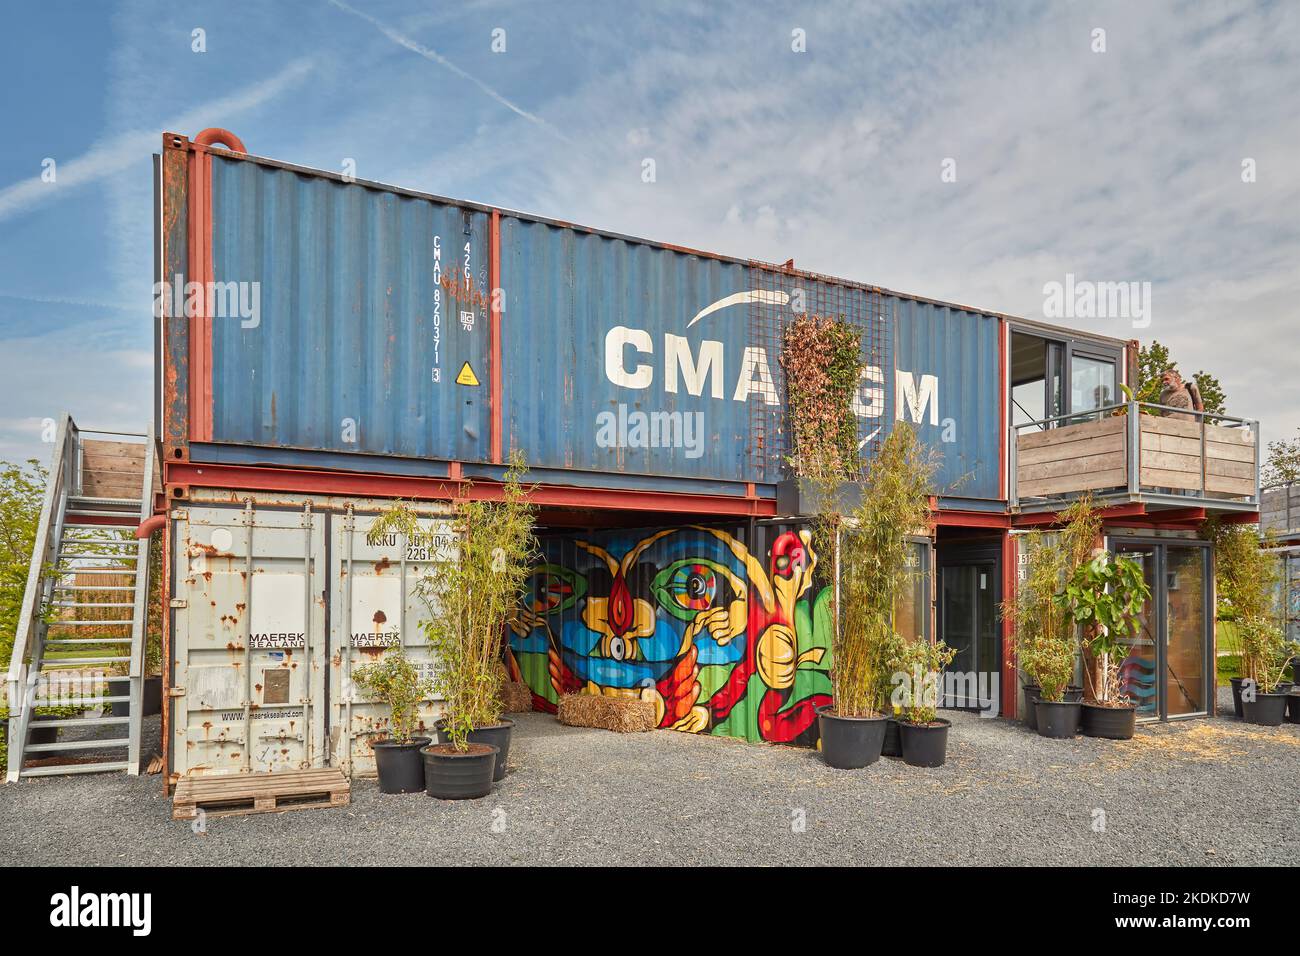 Almere, The Netherlands - April 21, 2022: Tiny offices made of used steel cargo containers in Almere, The Netherlands Stock Photo